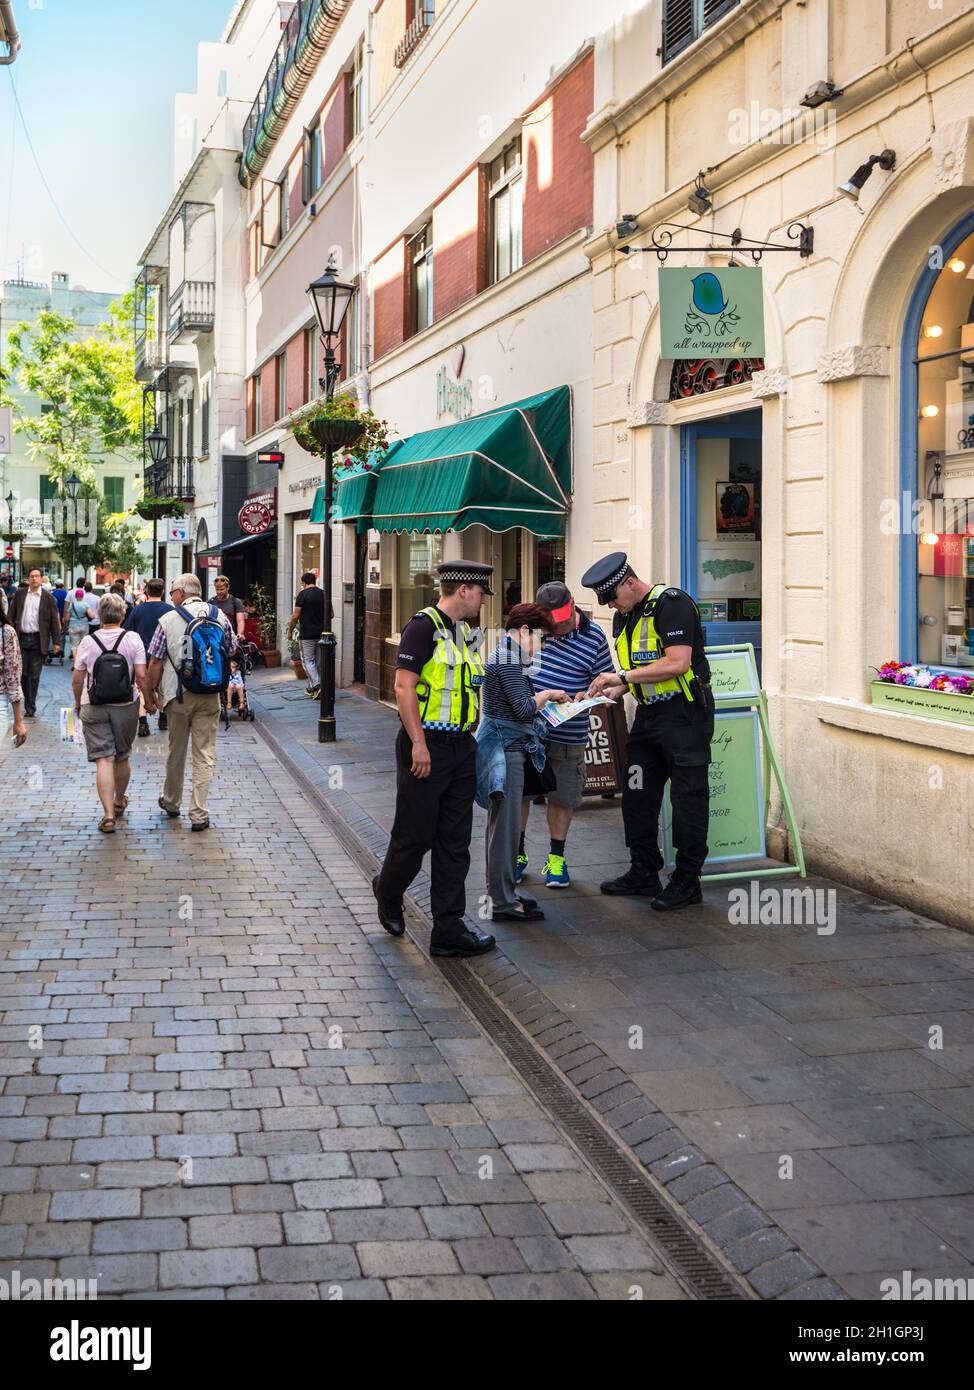 Gibraltar, UK - May 18, 2017: Police Officers gives direction advice to tourists at Main Street of Gibraltar, United Kingdom, Western Europe. Stock Photo